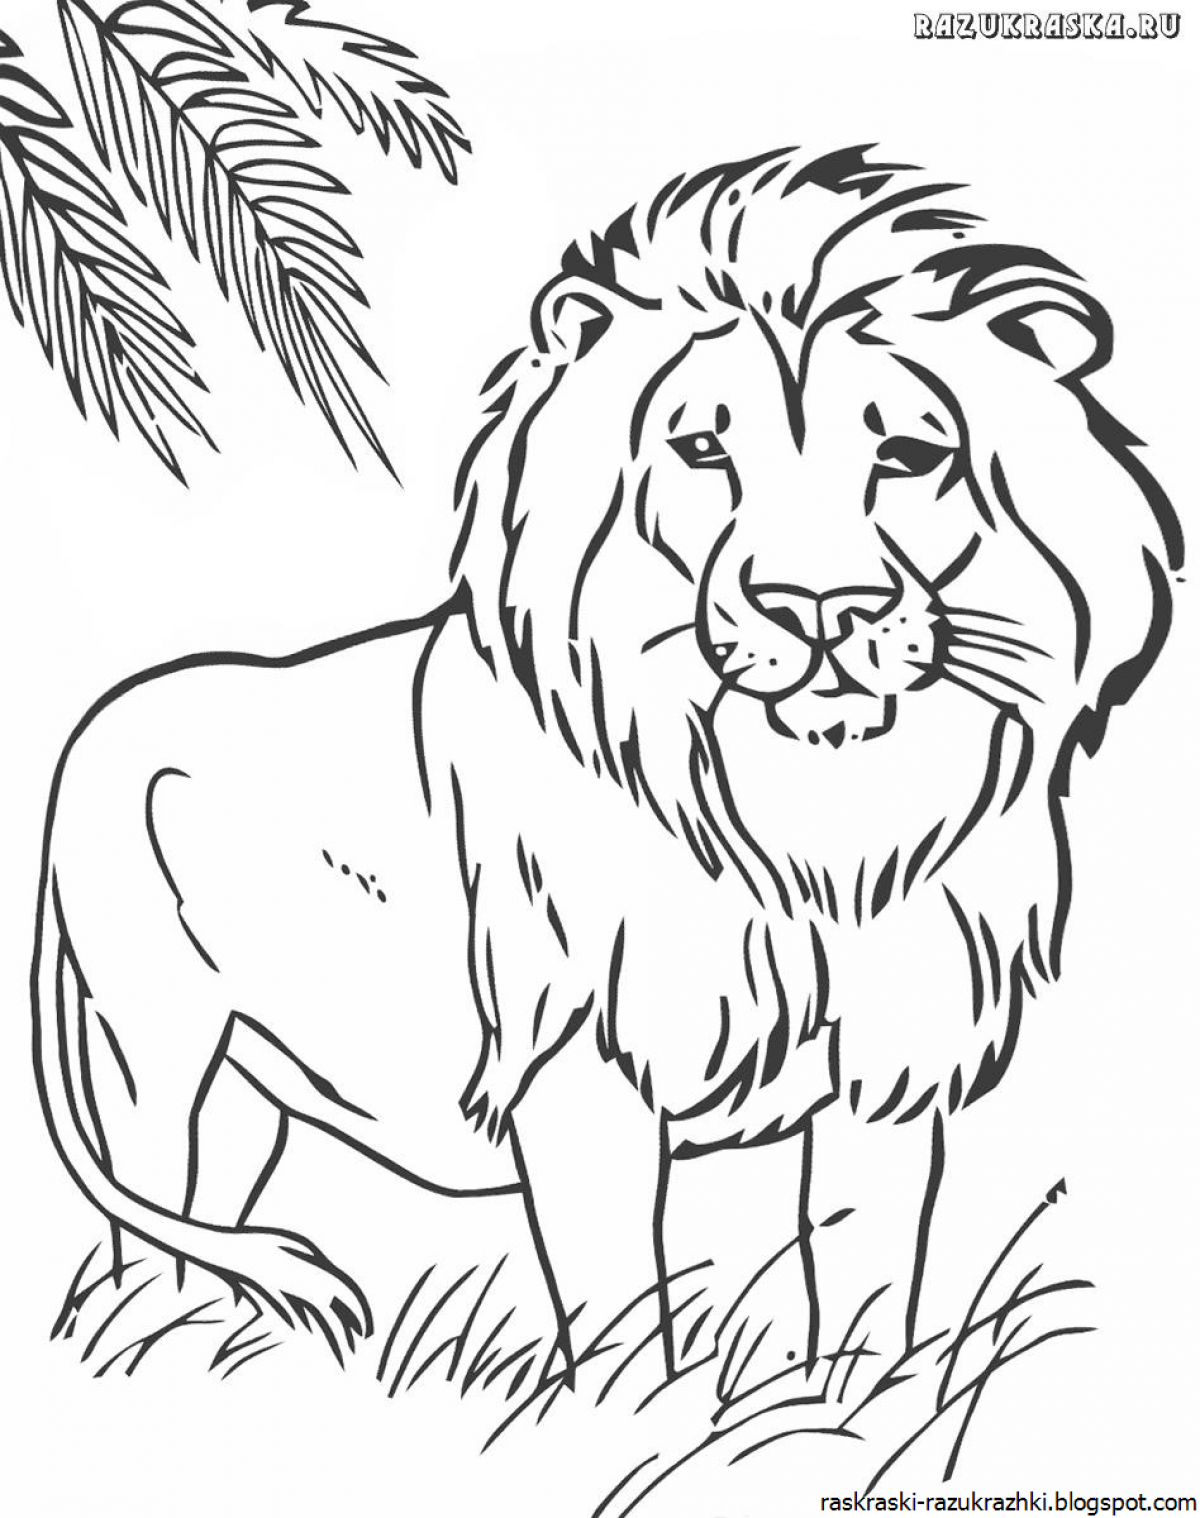 Coloring beckoning lion for children 3-4 years old